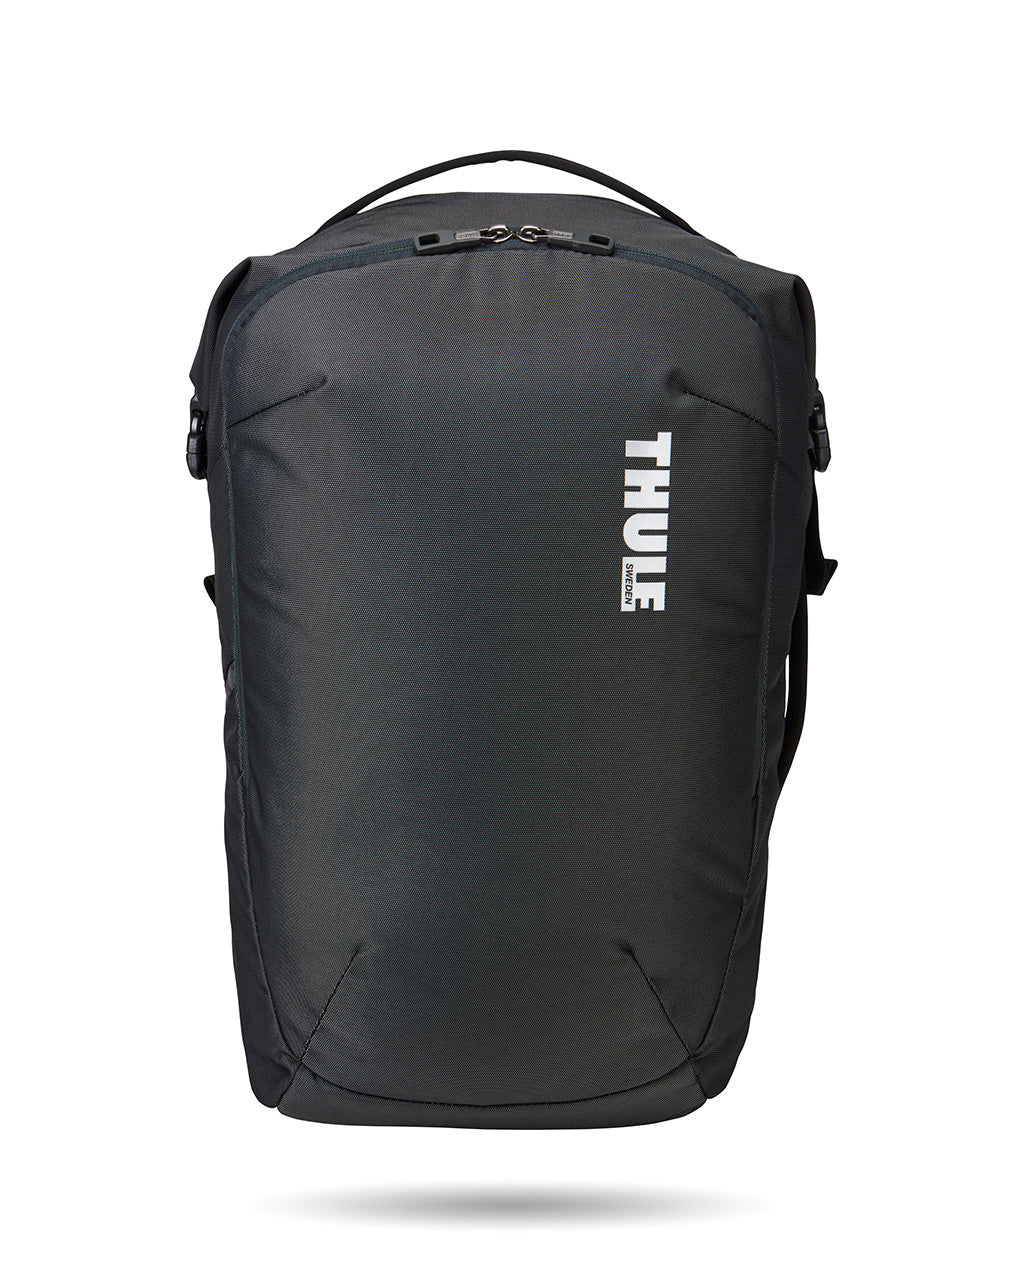 Thule Luggage Subterra 34L Backpack – Luggage Pros